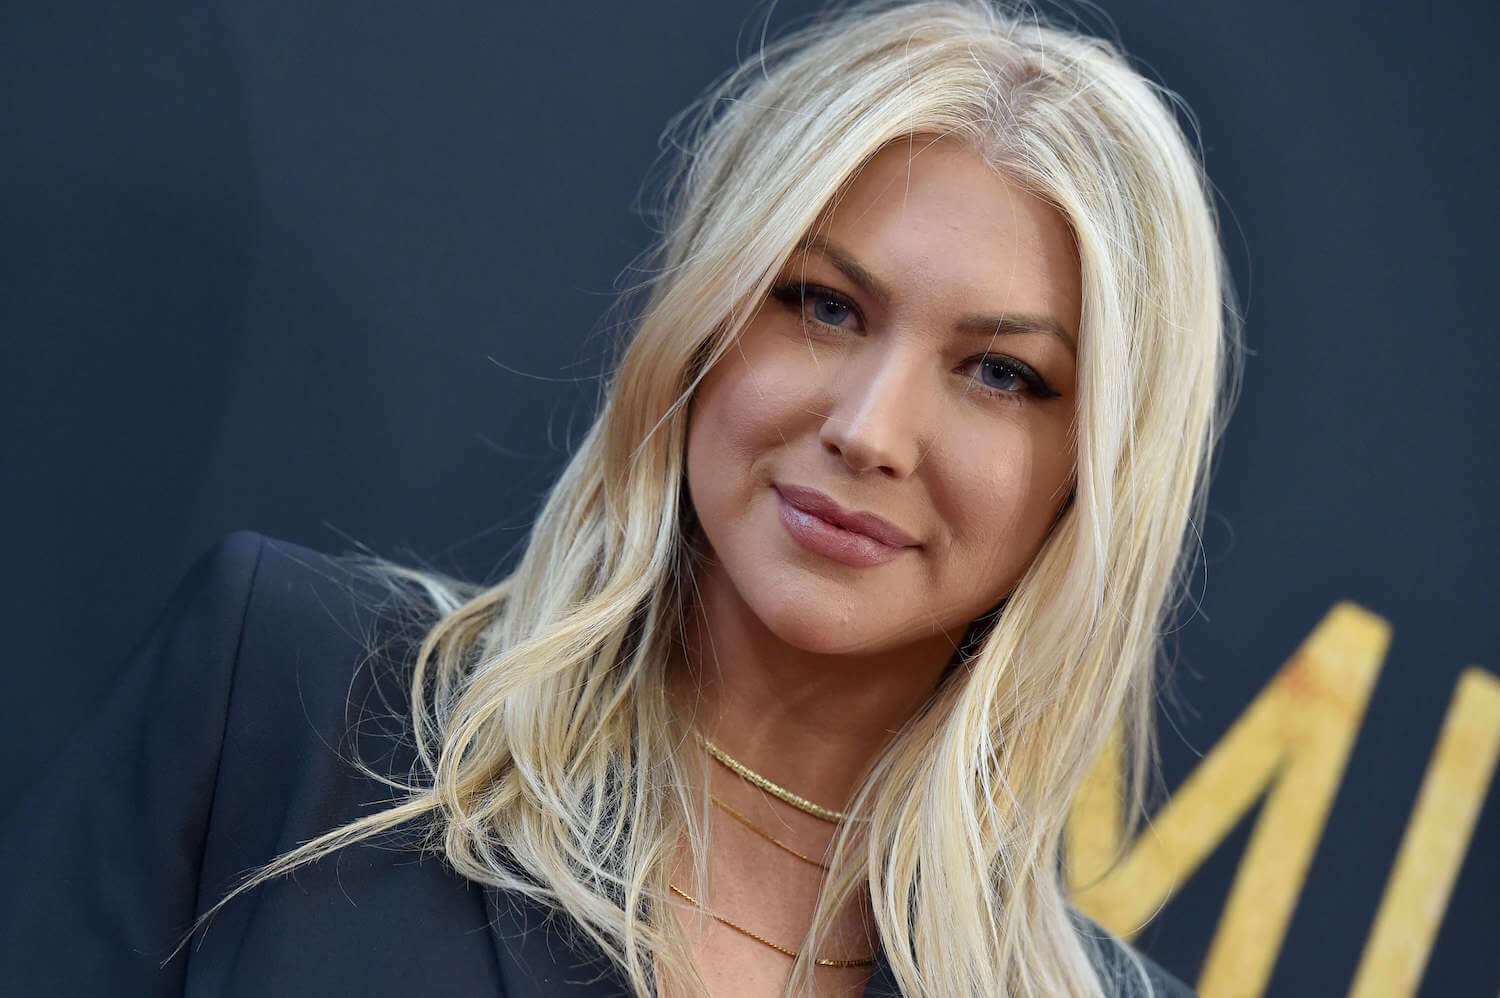 Former 'Vanderpump Rules' star Stassi Schroeder recently commented on Katie and Raquel's spat on social media. Stassi is seen here wearing a black blazer.